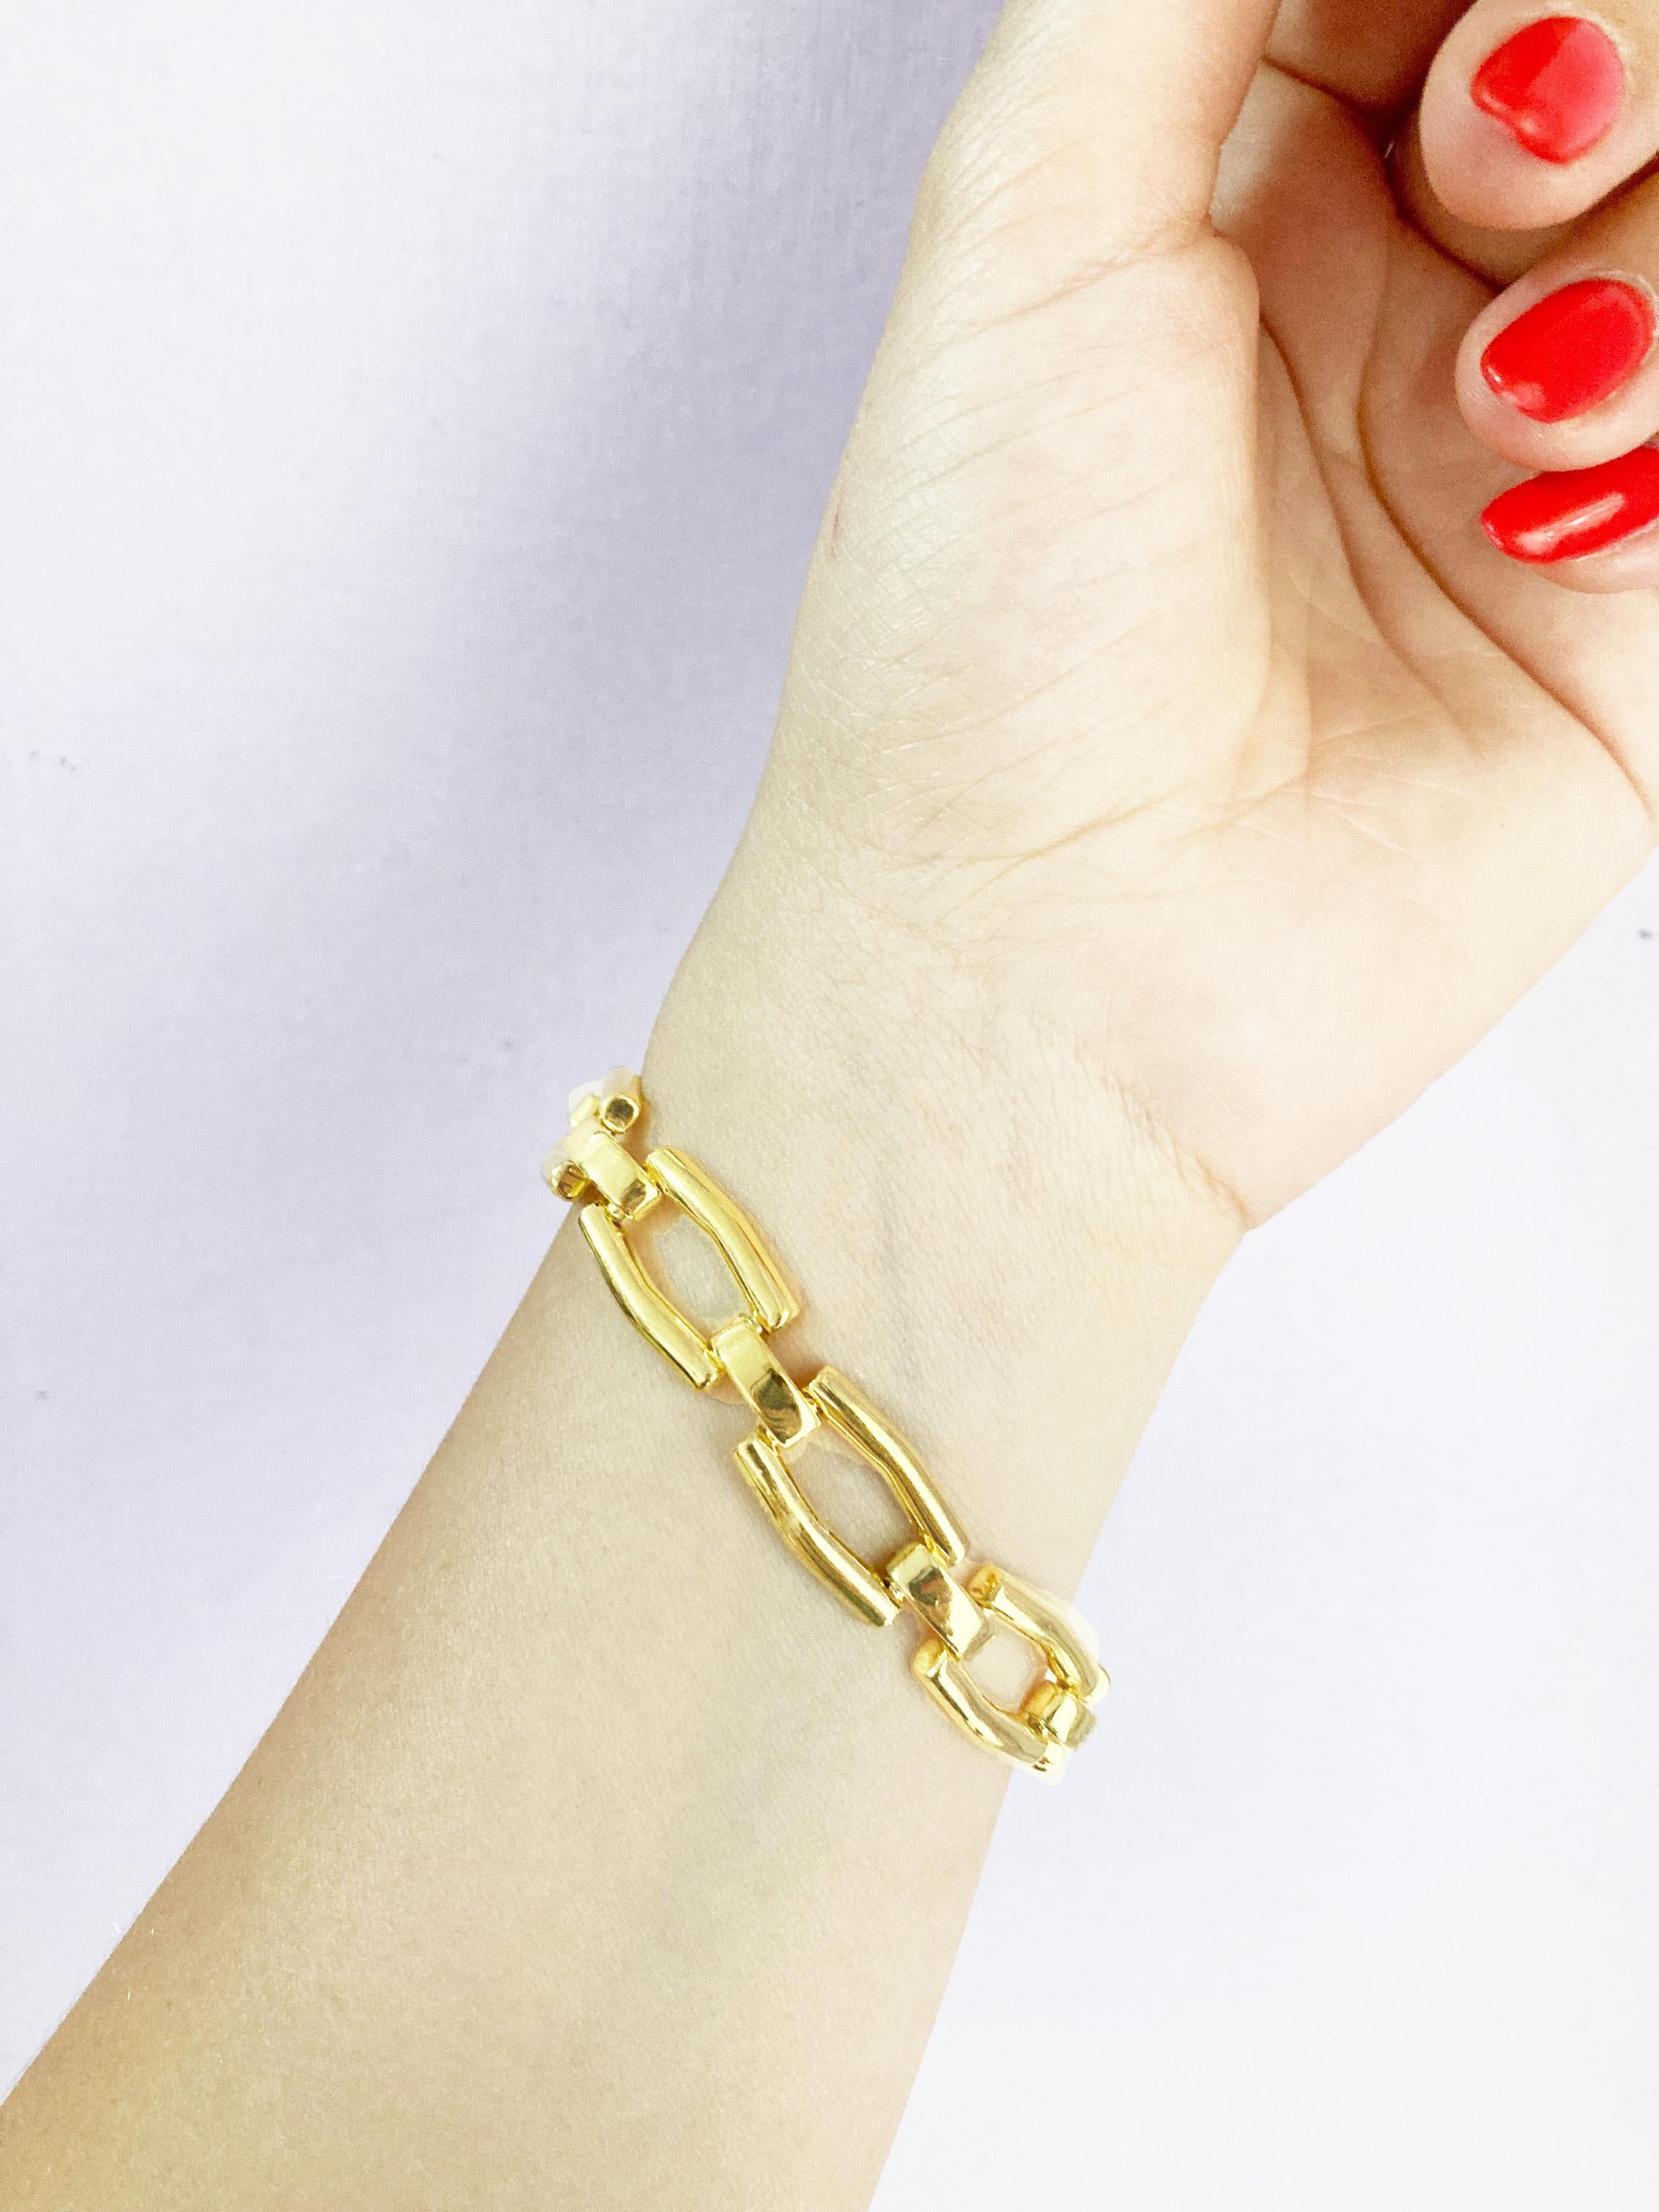 Rossella Ugolini 24K Yellow Gold Plated Unique Links Chain Bracelet For Sale 2